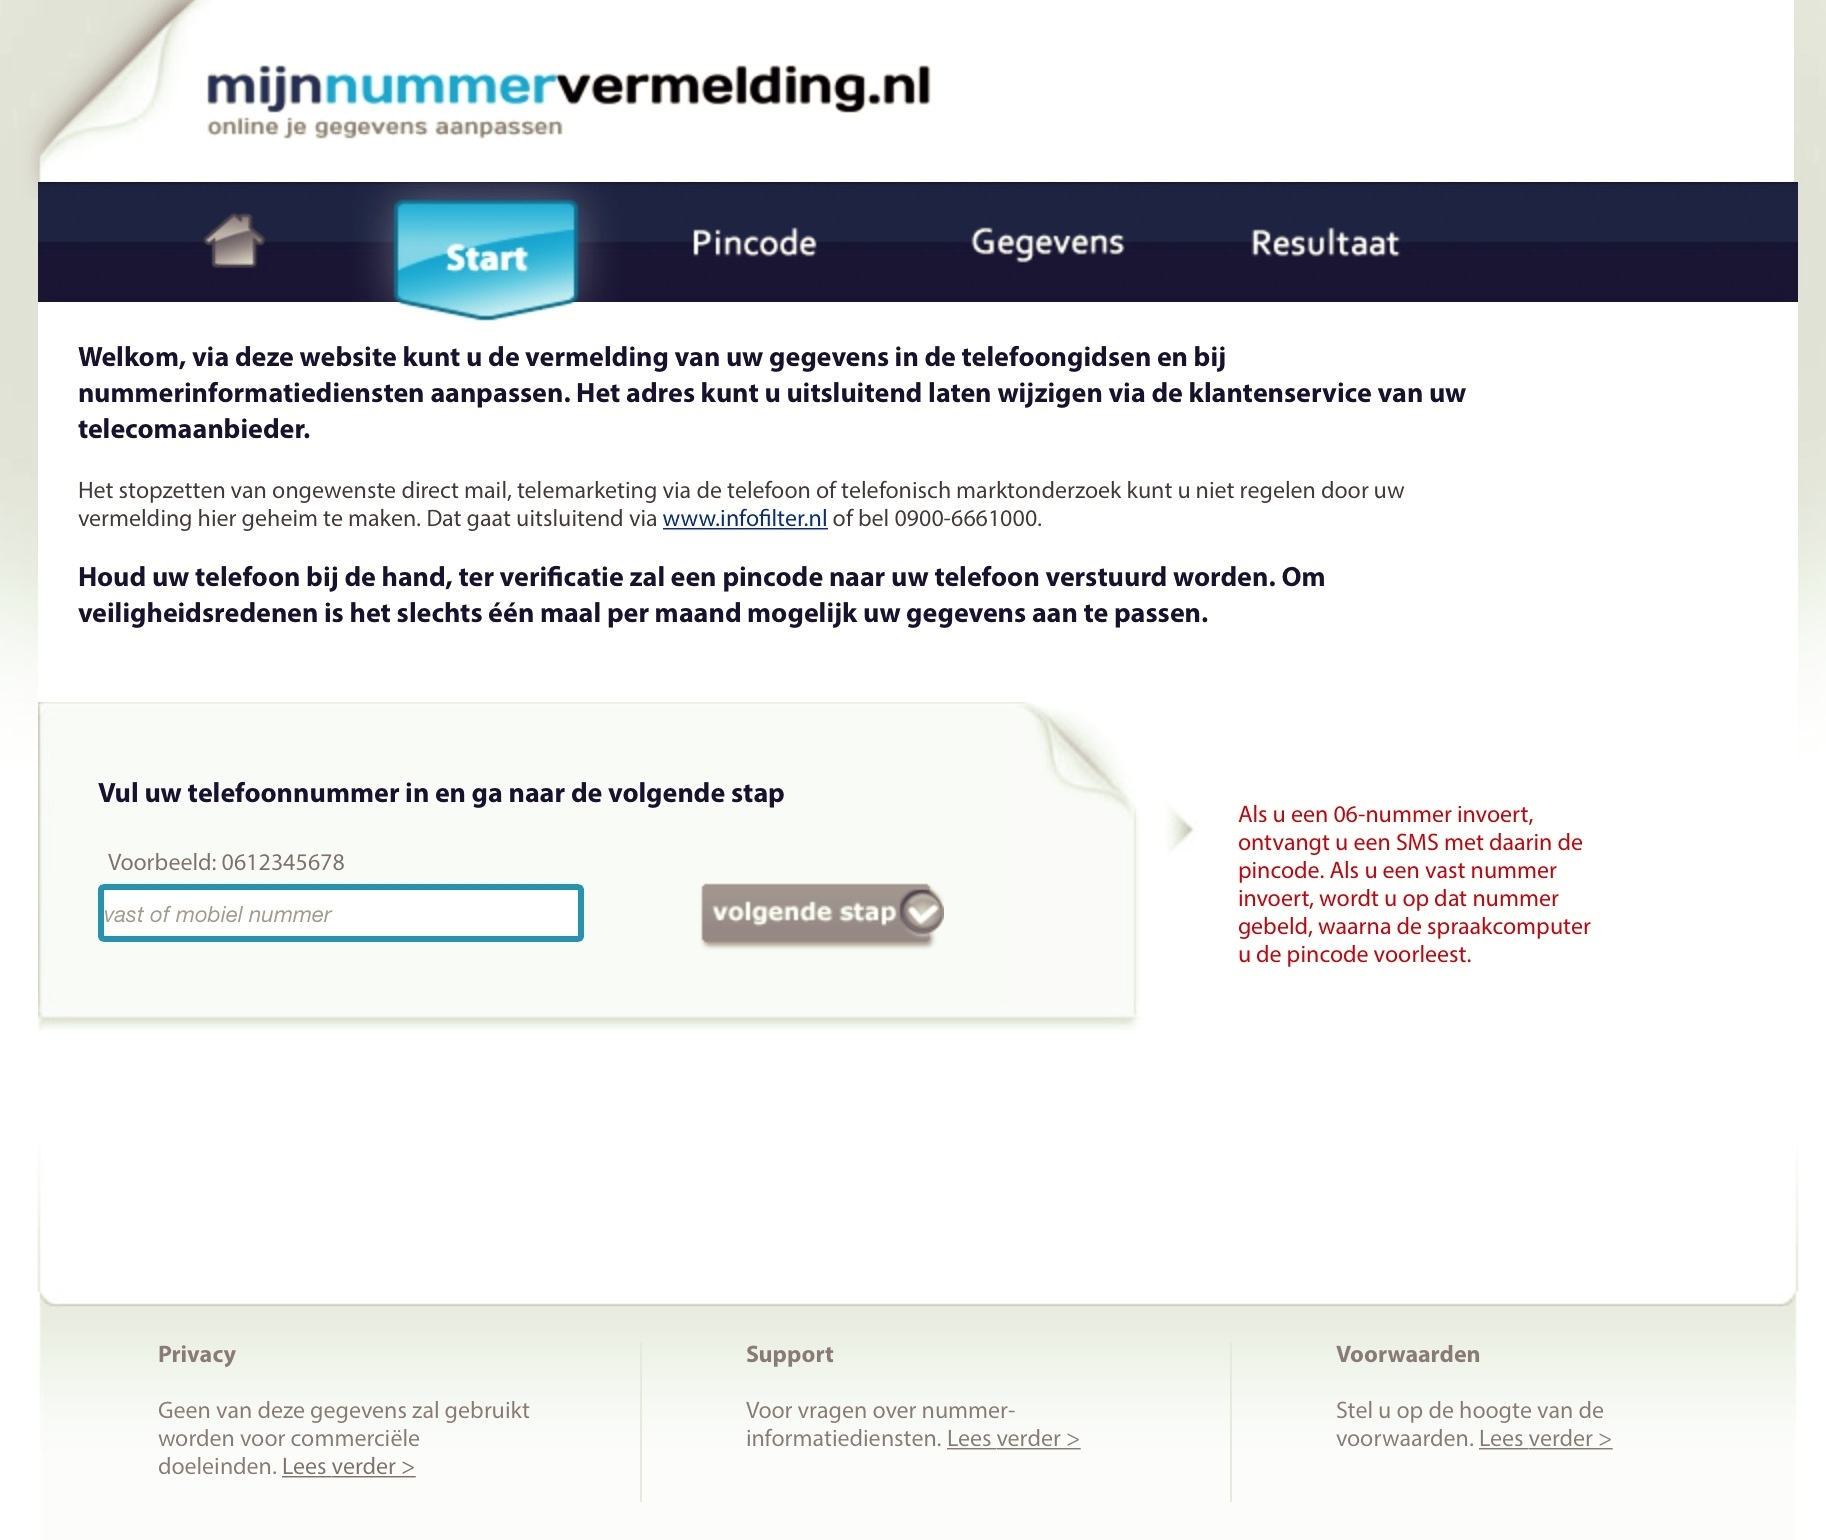  MijnNummervermelding.nl is the central place where all dutch telco's enable users to change their address info. 